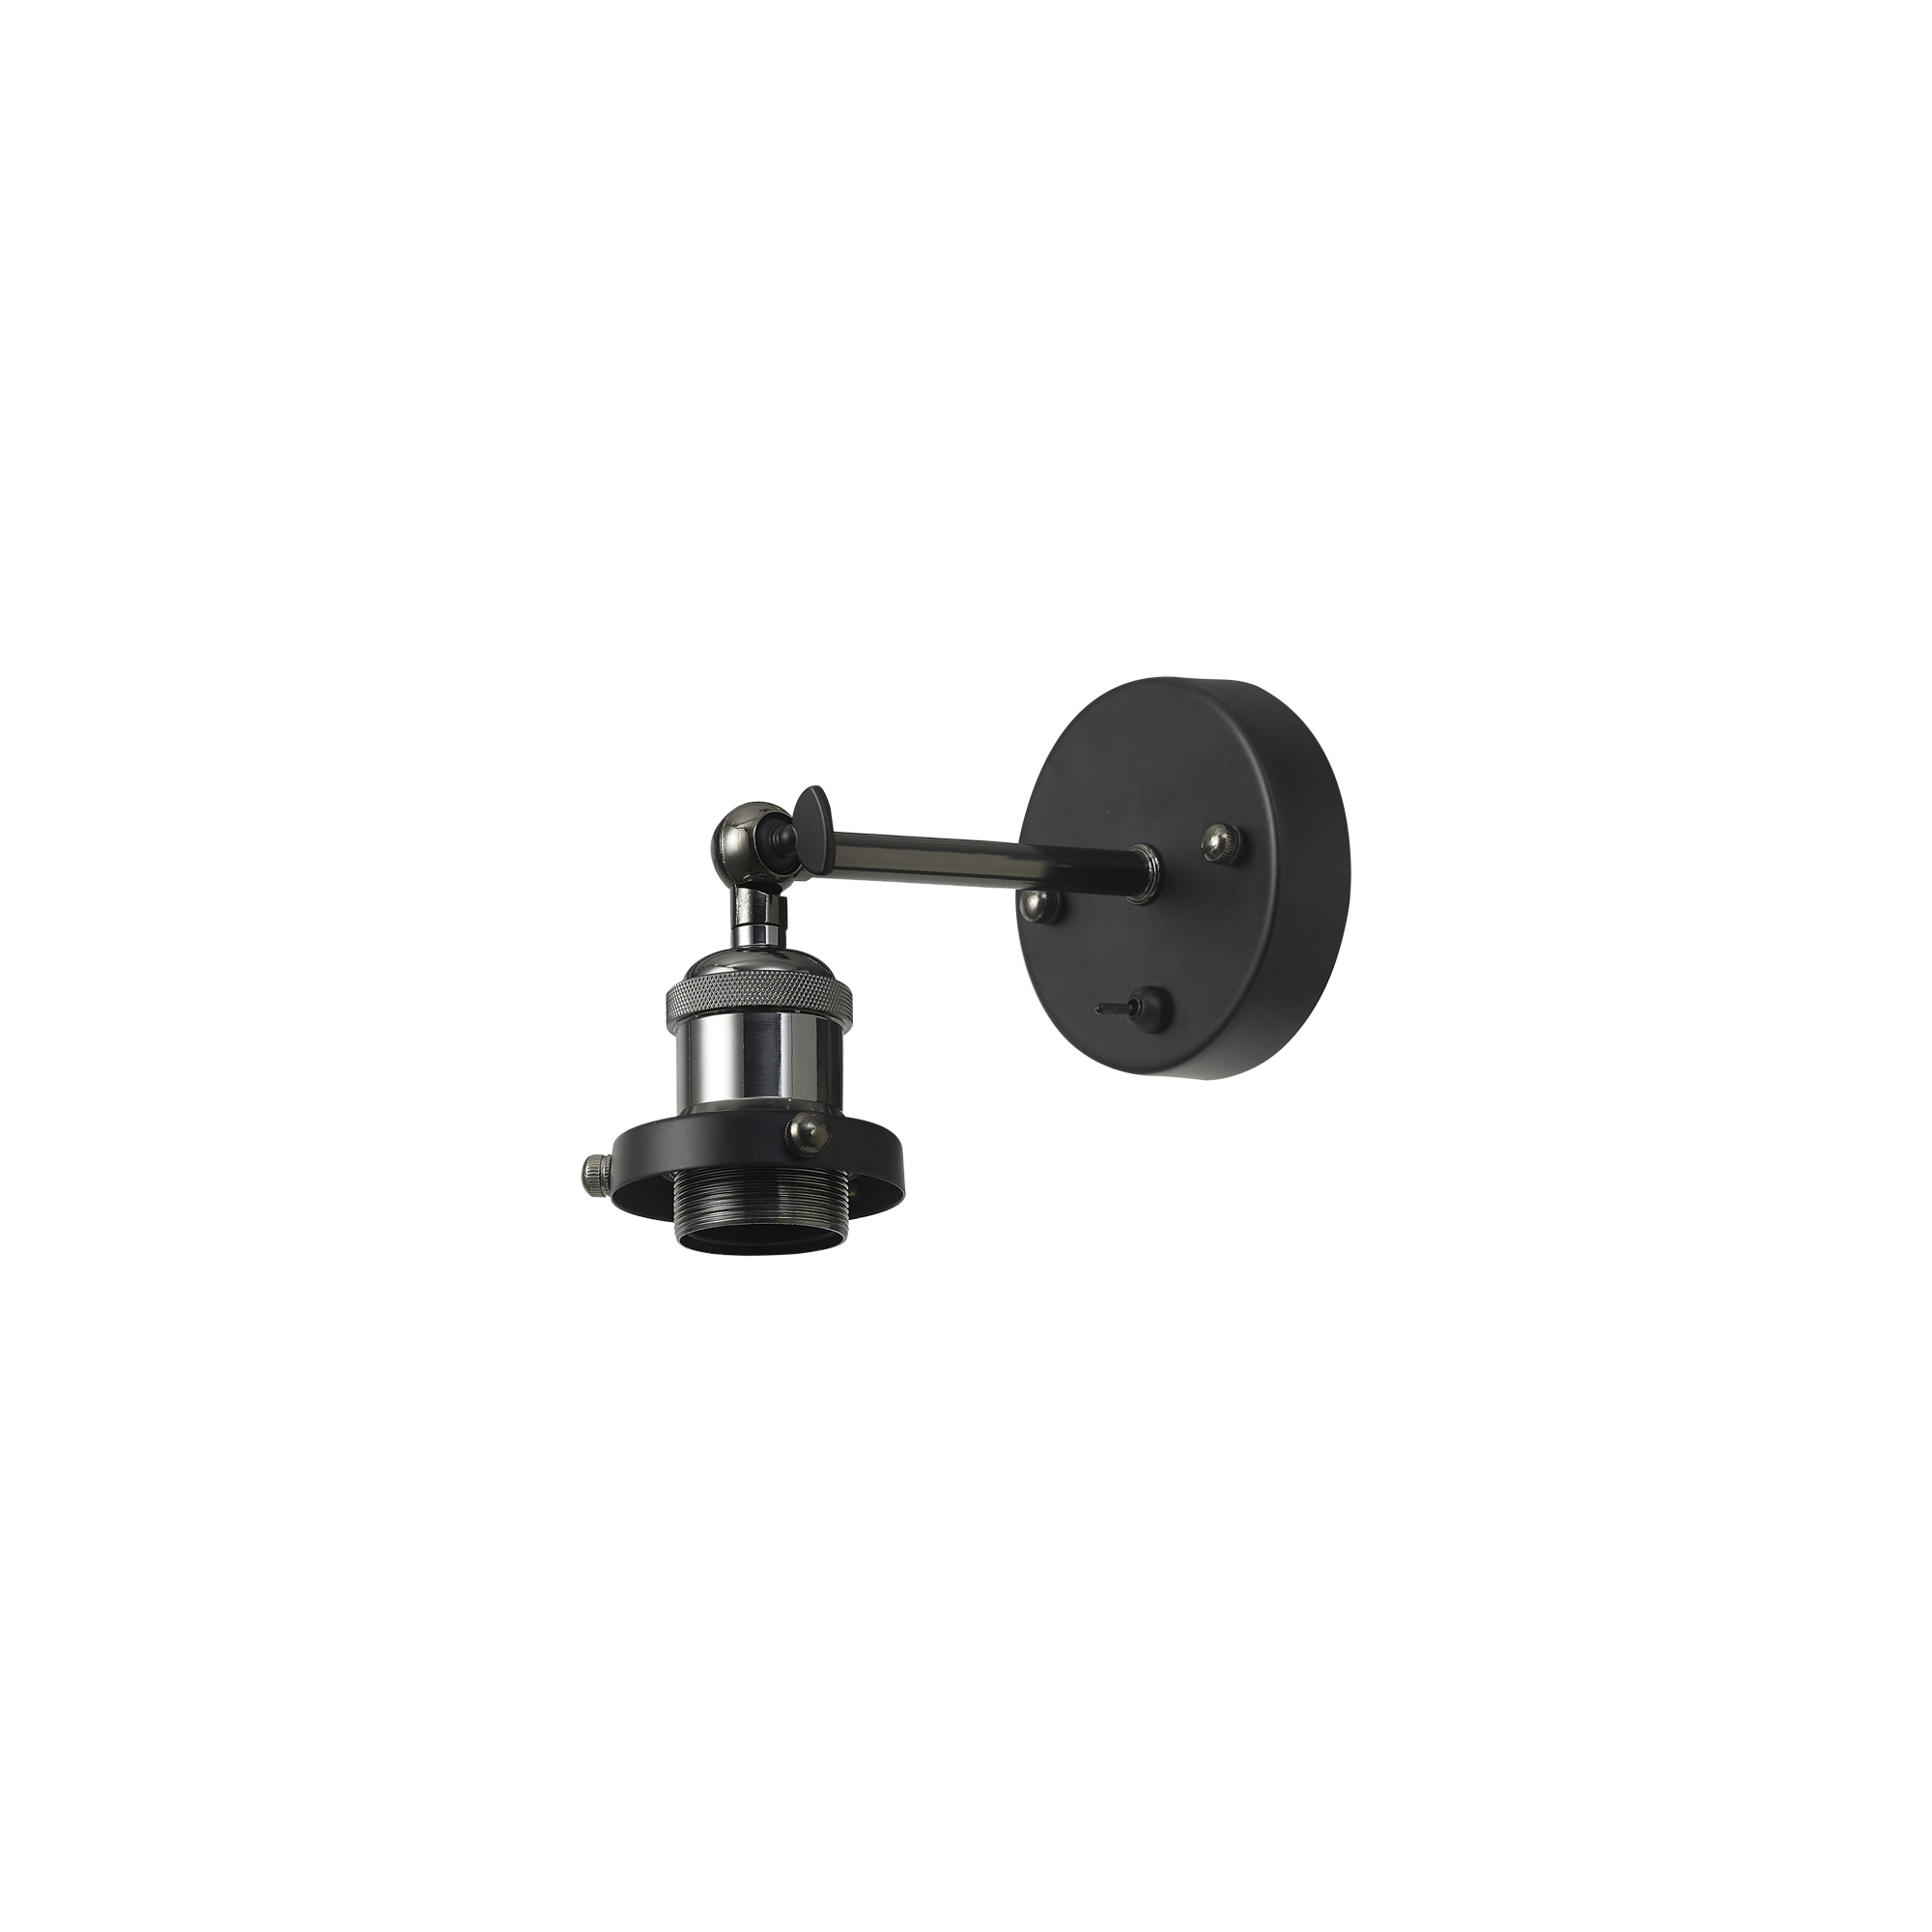 D0701  Dreifa Switched Wall Lamp 1 Light Black Chrome